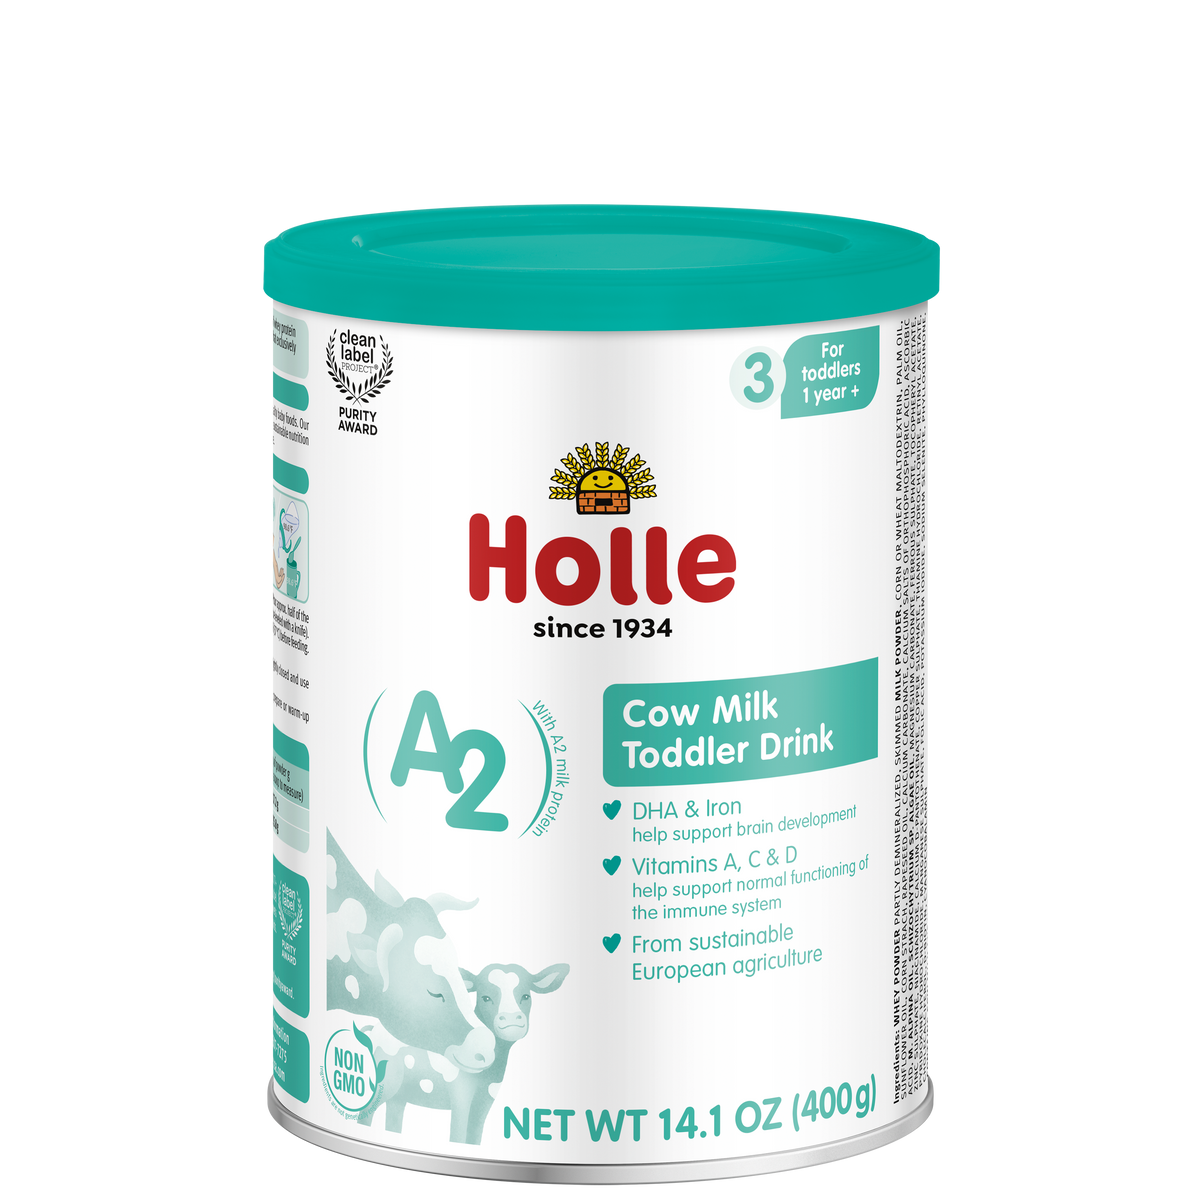 Holle Cow Milk Toddler Drink (A2) - Stage 3 | Non GMO (14 oz)